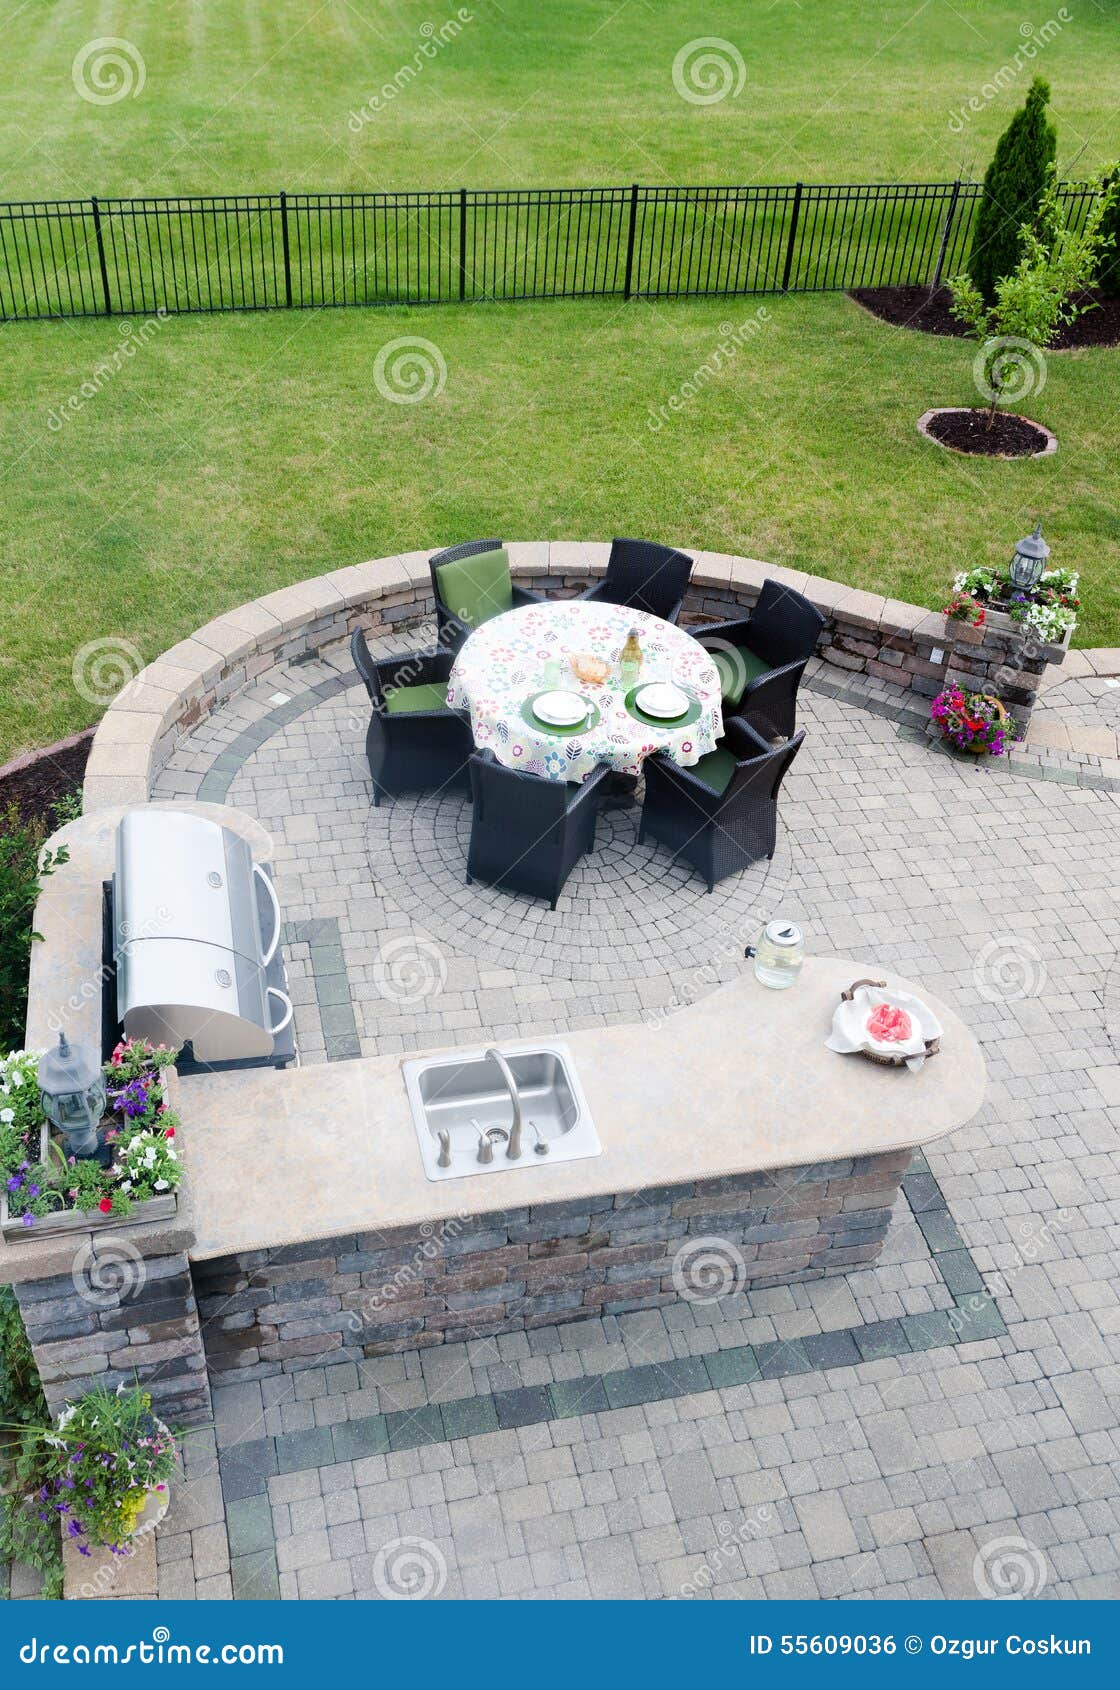 outdoor living area on an open-air patio